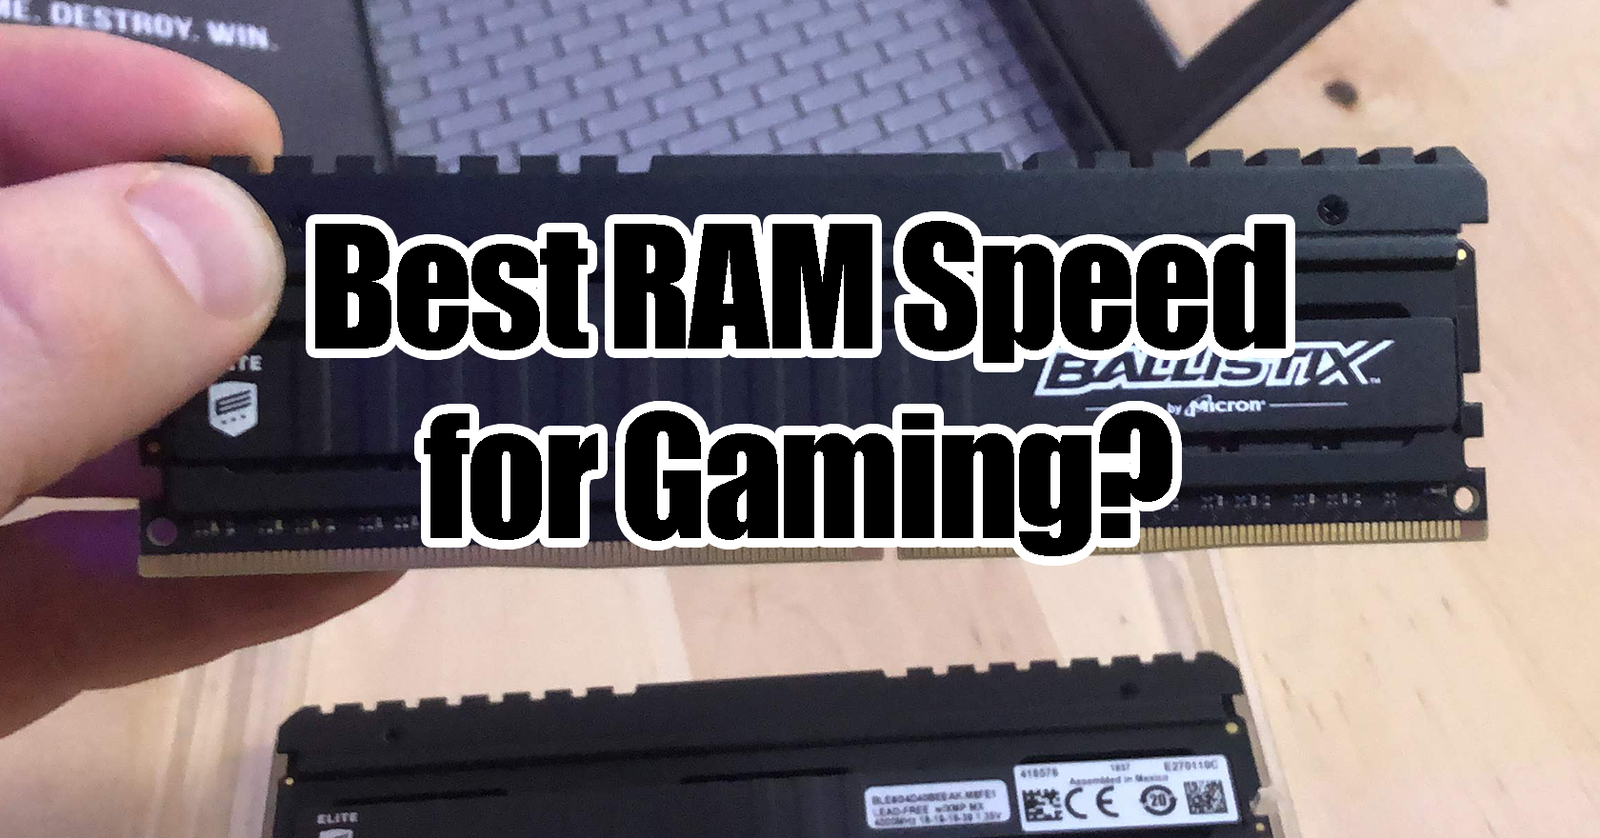 Opfattelse Aske salon What's The Best RAM Speed for Gaming in 2020? - Newb Computer Build